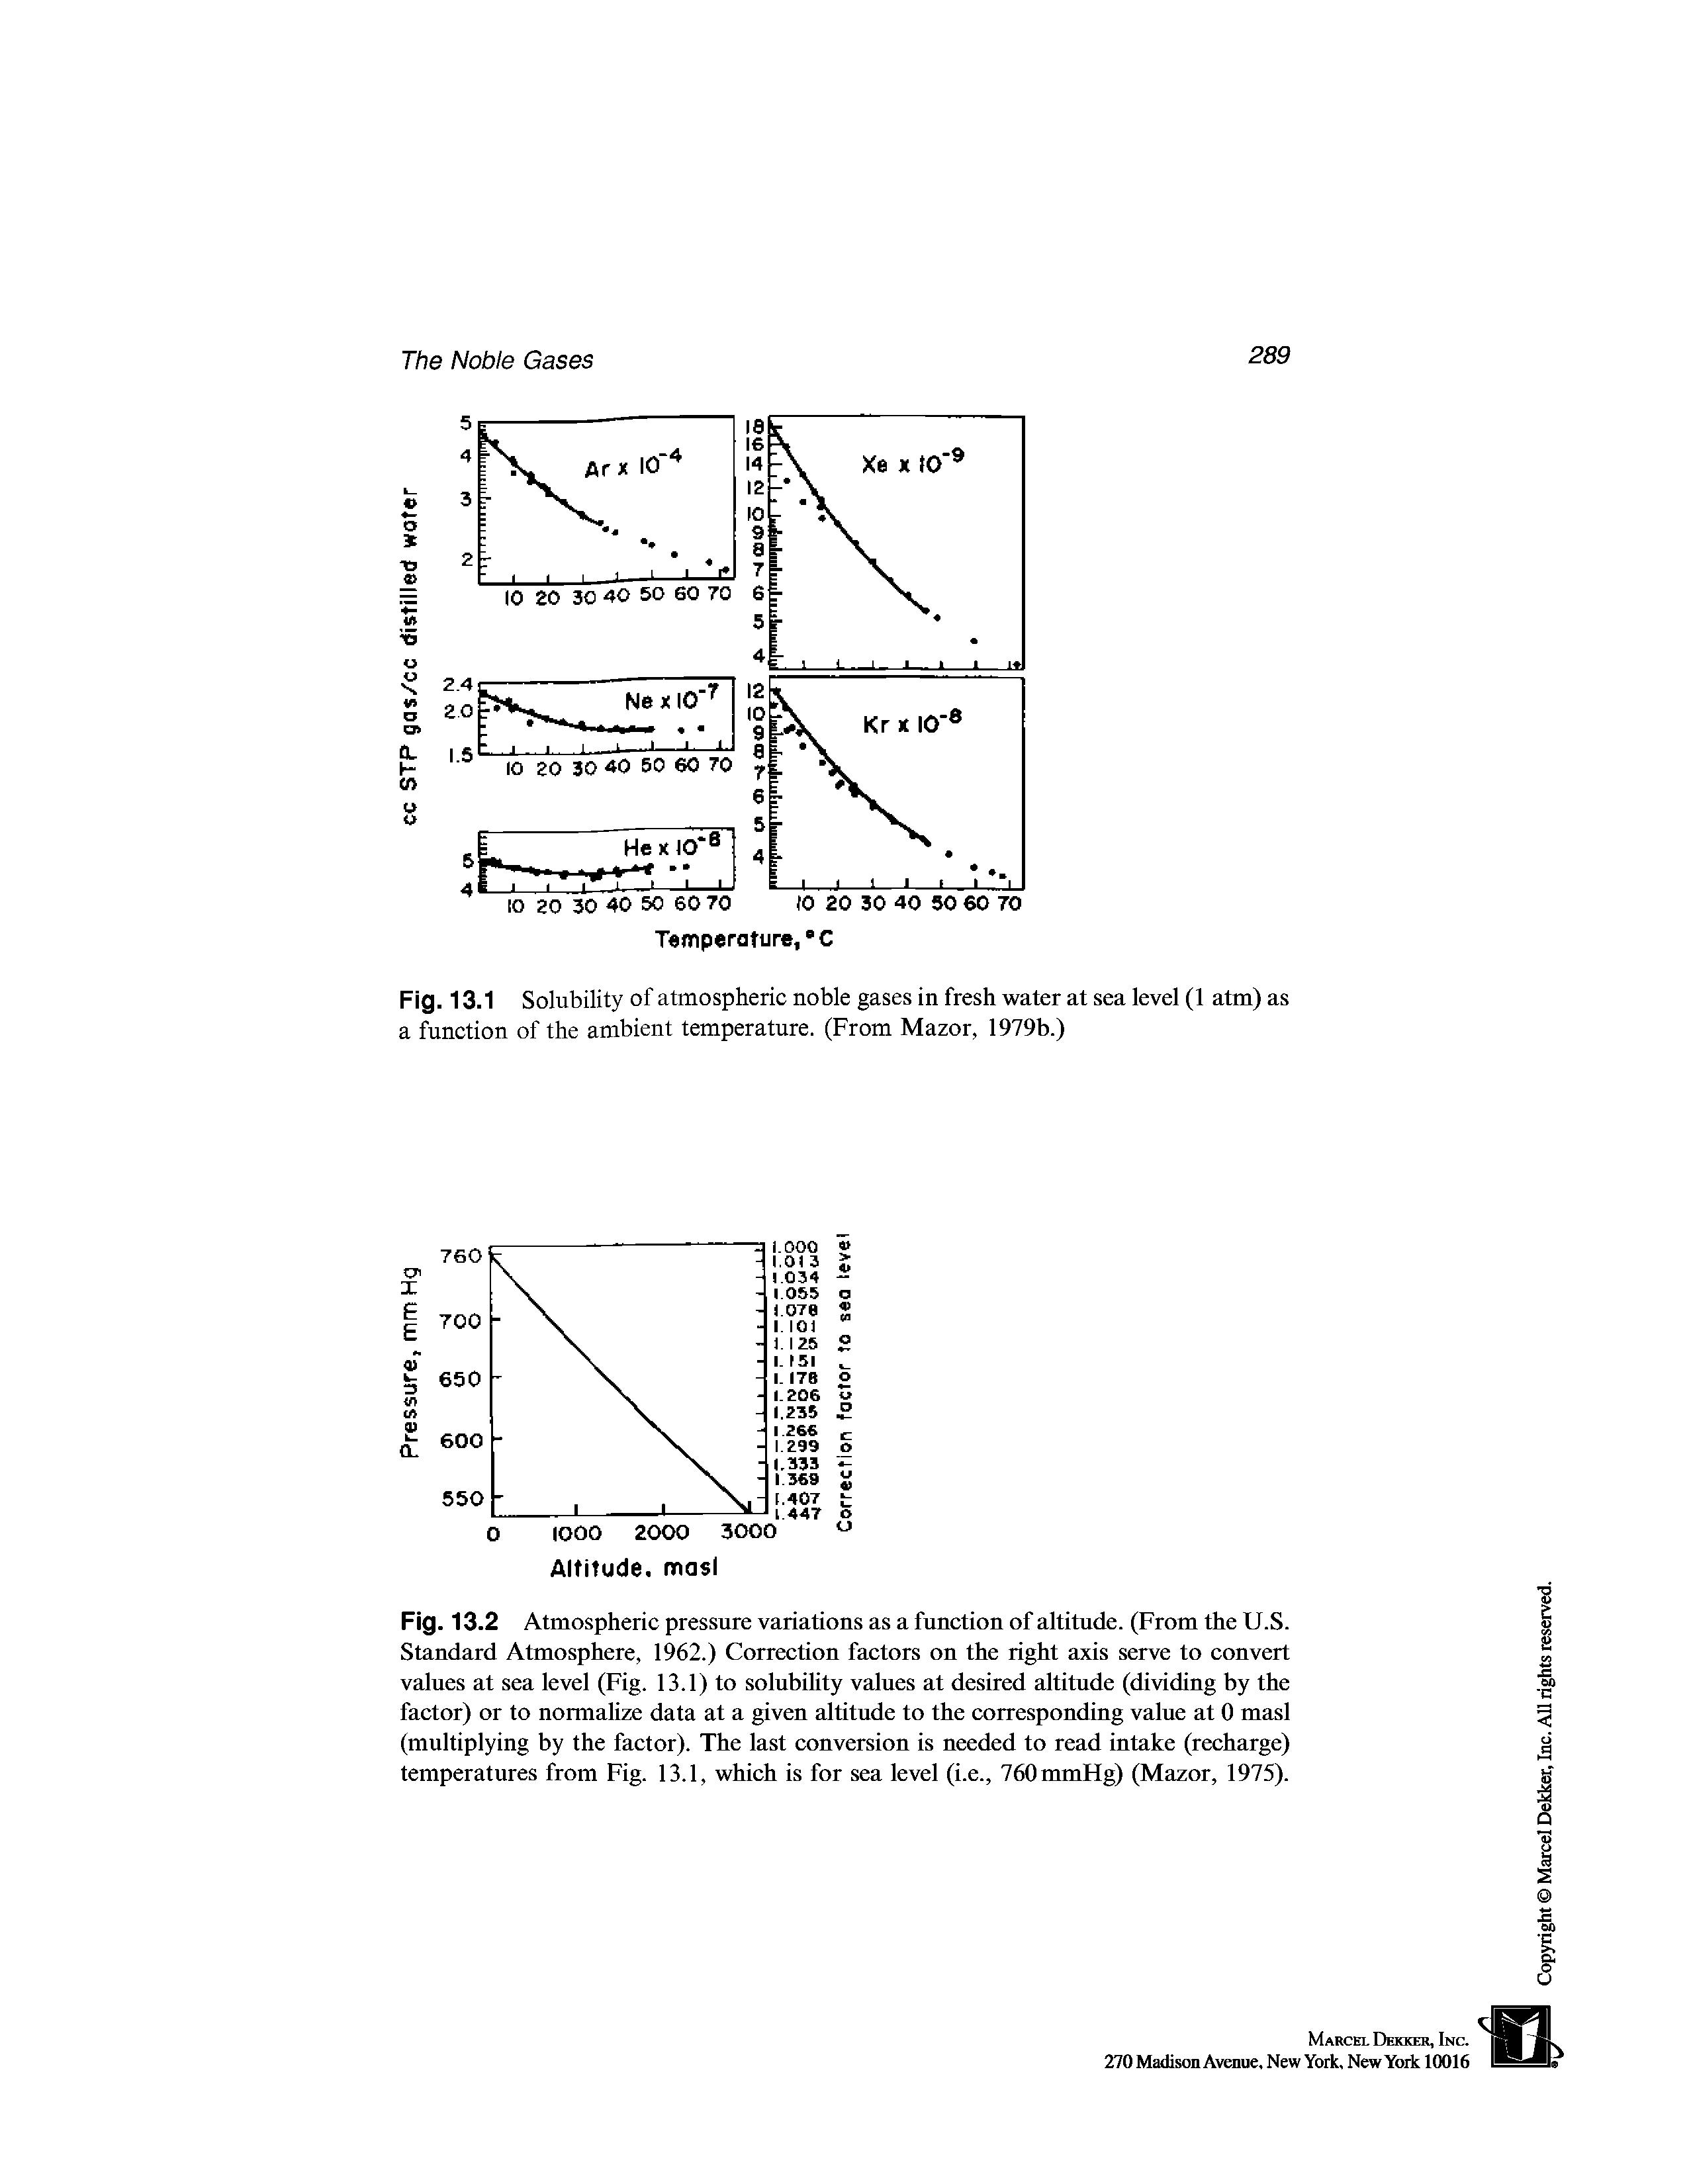 Fig. 13.2 Atmospheric pressure variations as a function of altitude. (From the U.S. Standard Atmosphere, 1962.) Correction factors on the right axis serve to convert values at sea level (Fig. 13.1) to solubility values at desired altitude (dividing by the factor) or to normalize data at a given altitude to the corresponding value at 0 masl (multiplying by the factor). The last conversion is needed to read intake (recharge) temperatures from Fig. 13.1, which is for sea level (i.e., 760mmHg) (Mazor, 1975).